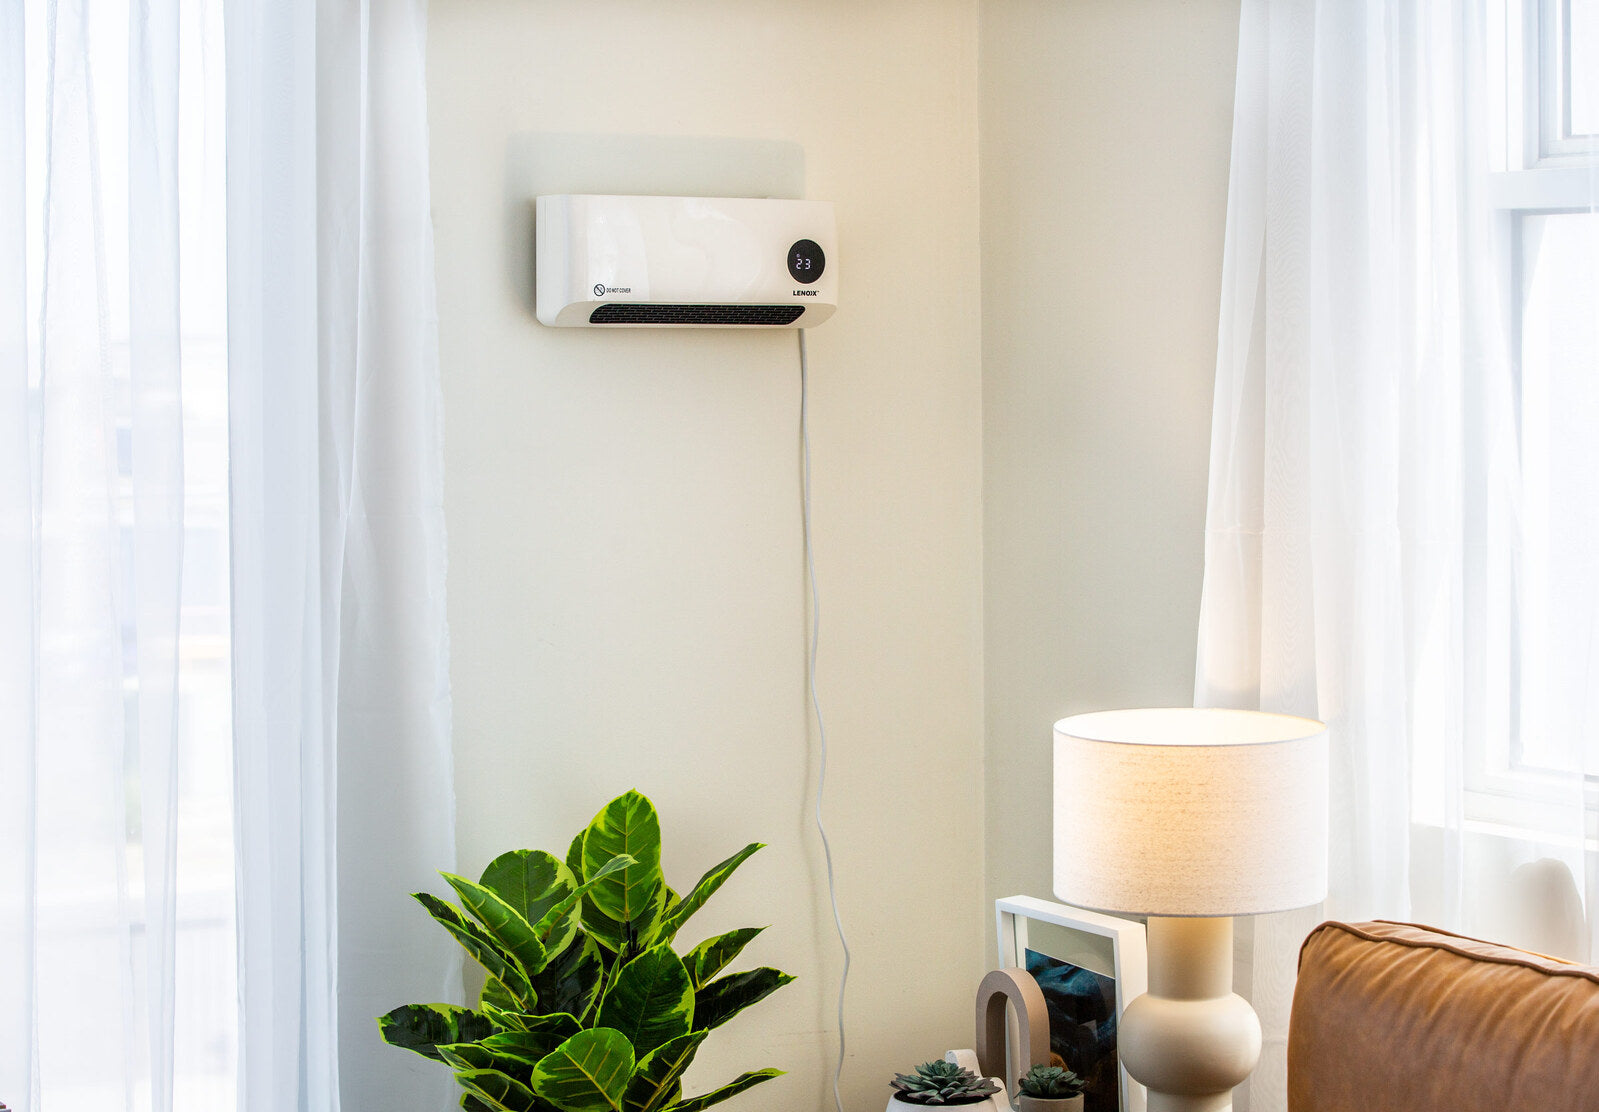 Wall-Mounted Heater & Fan with Remote Control - SILBERSHELL